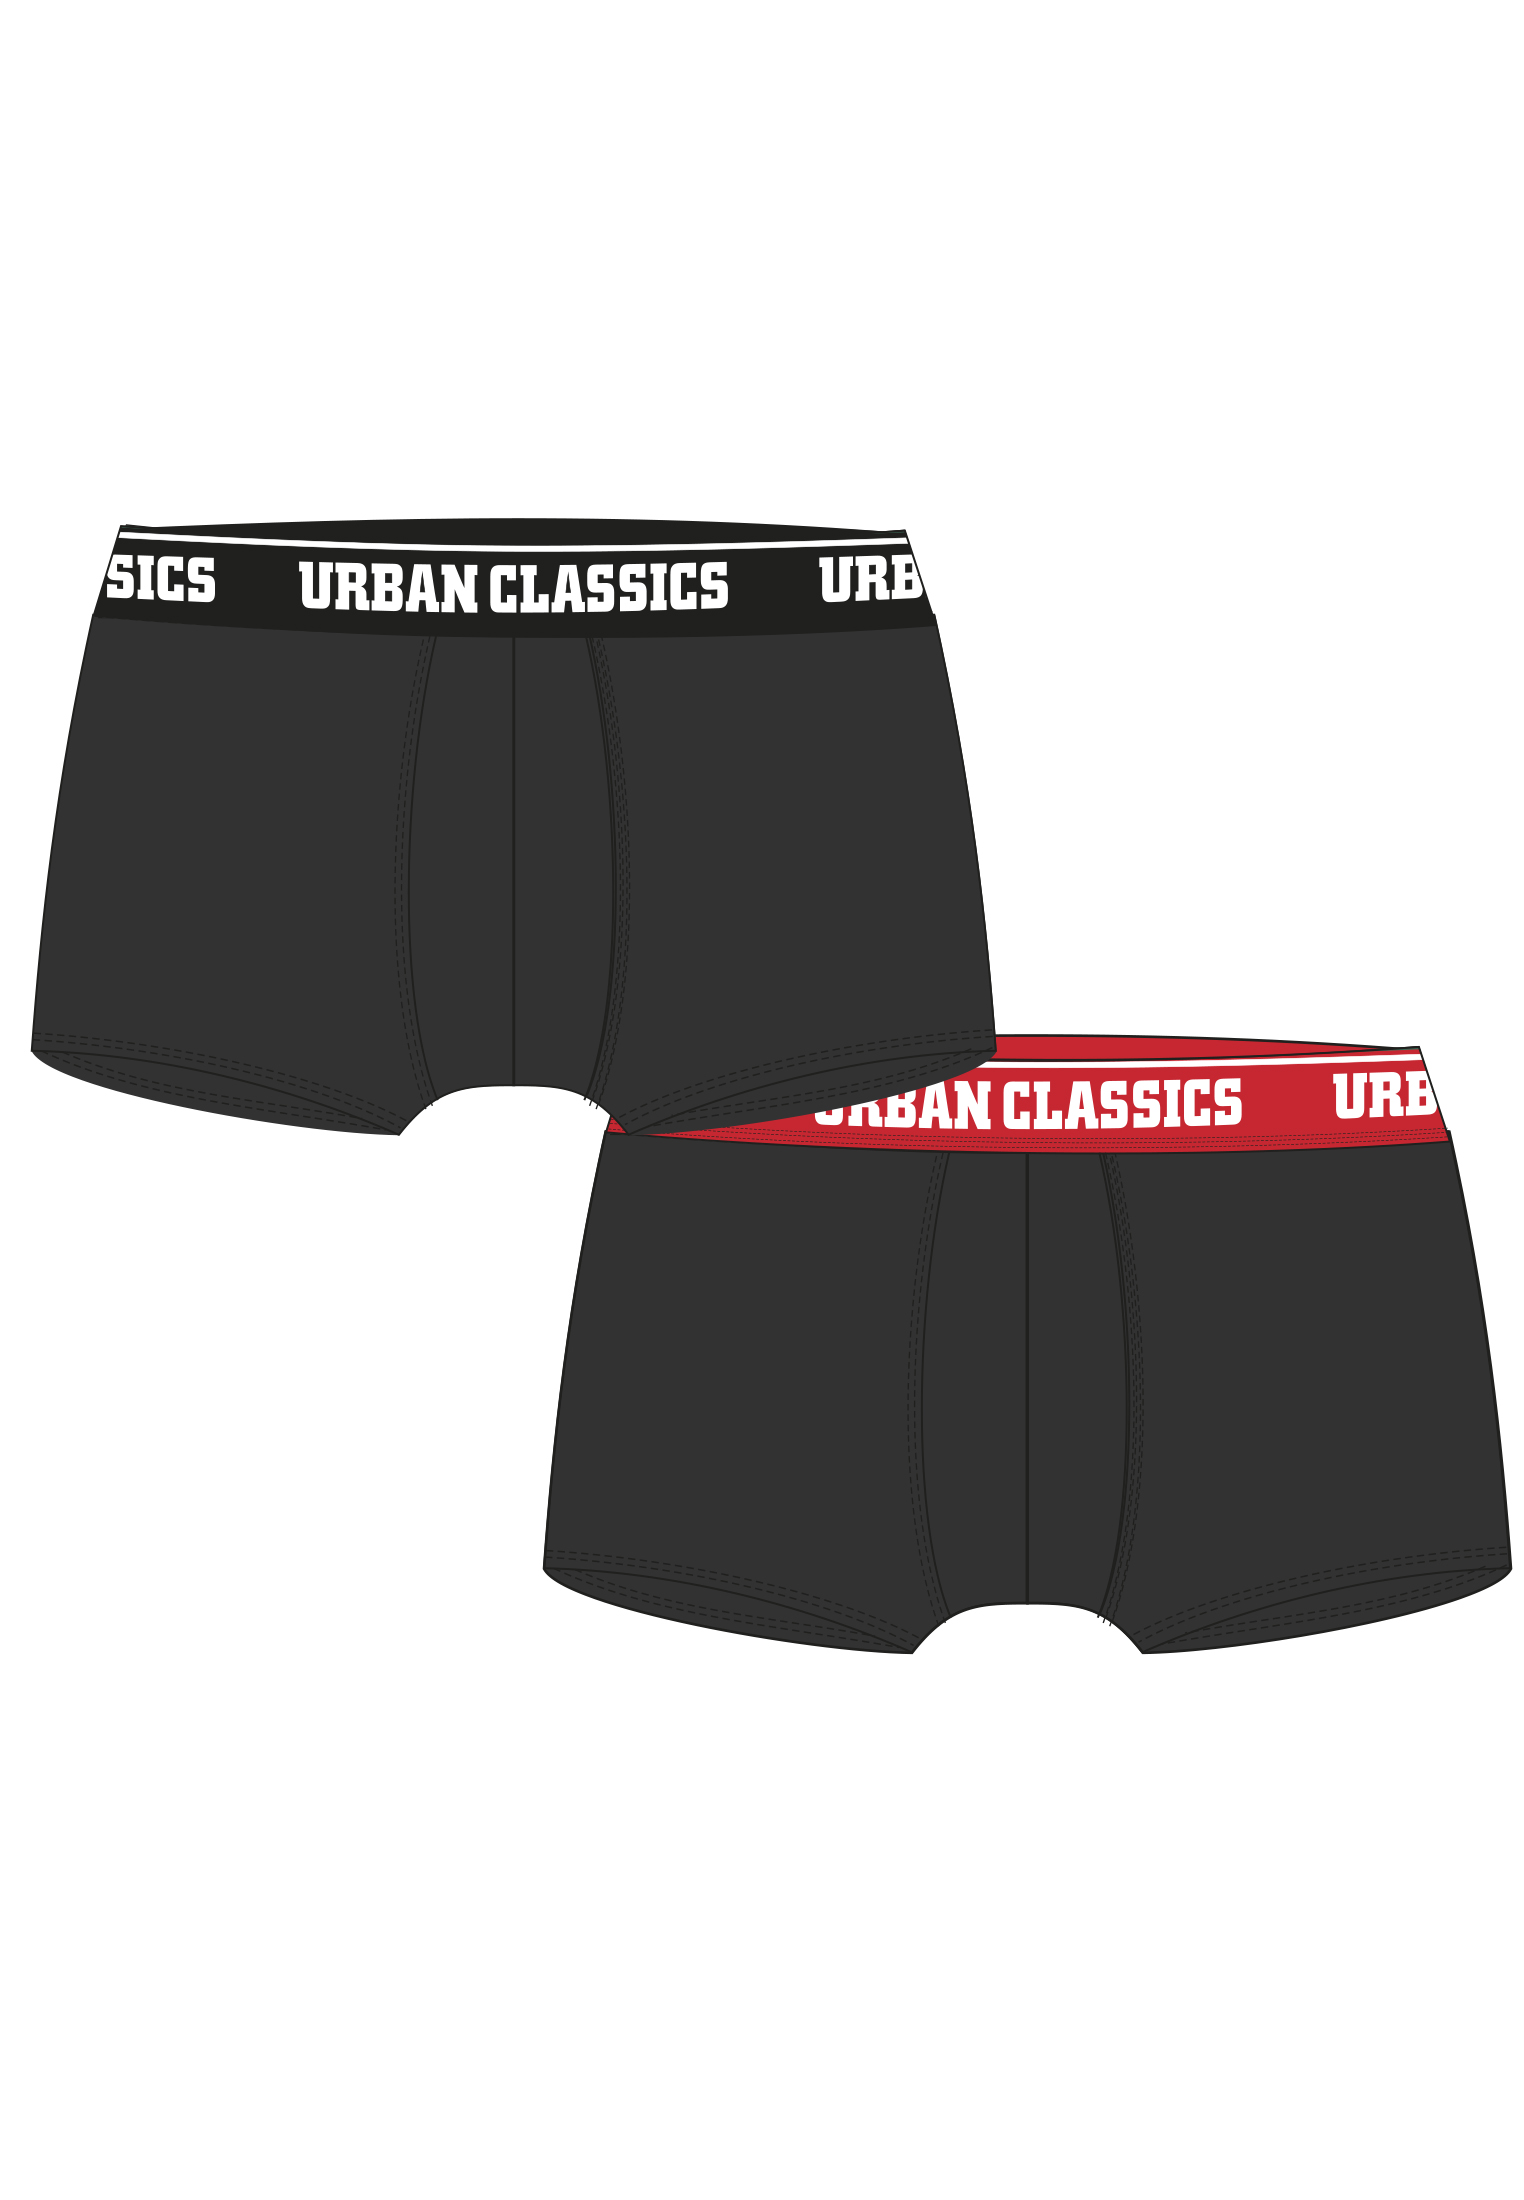 Underwear Men Boxer Shorts Double Pack in Farbe black/charcoal